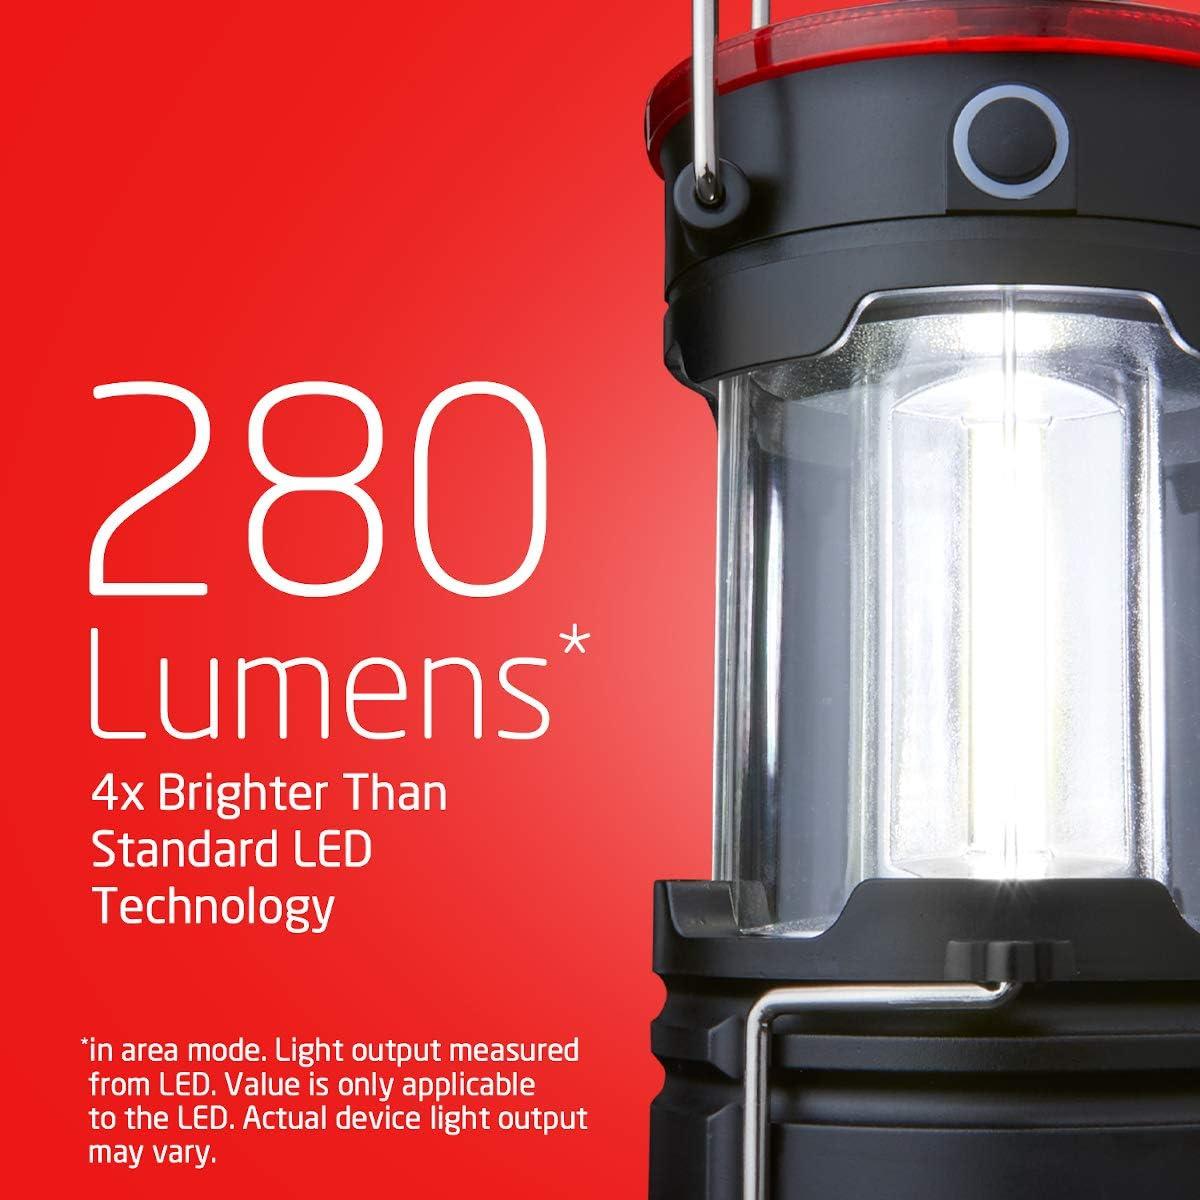 What You Should Know About These Eveready LED Lanterns 